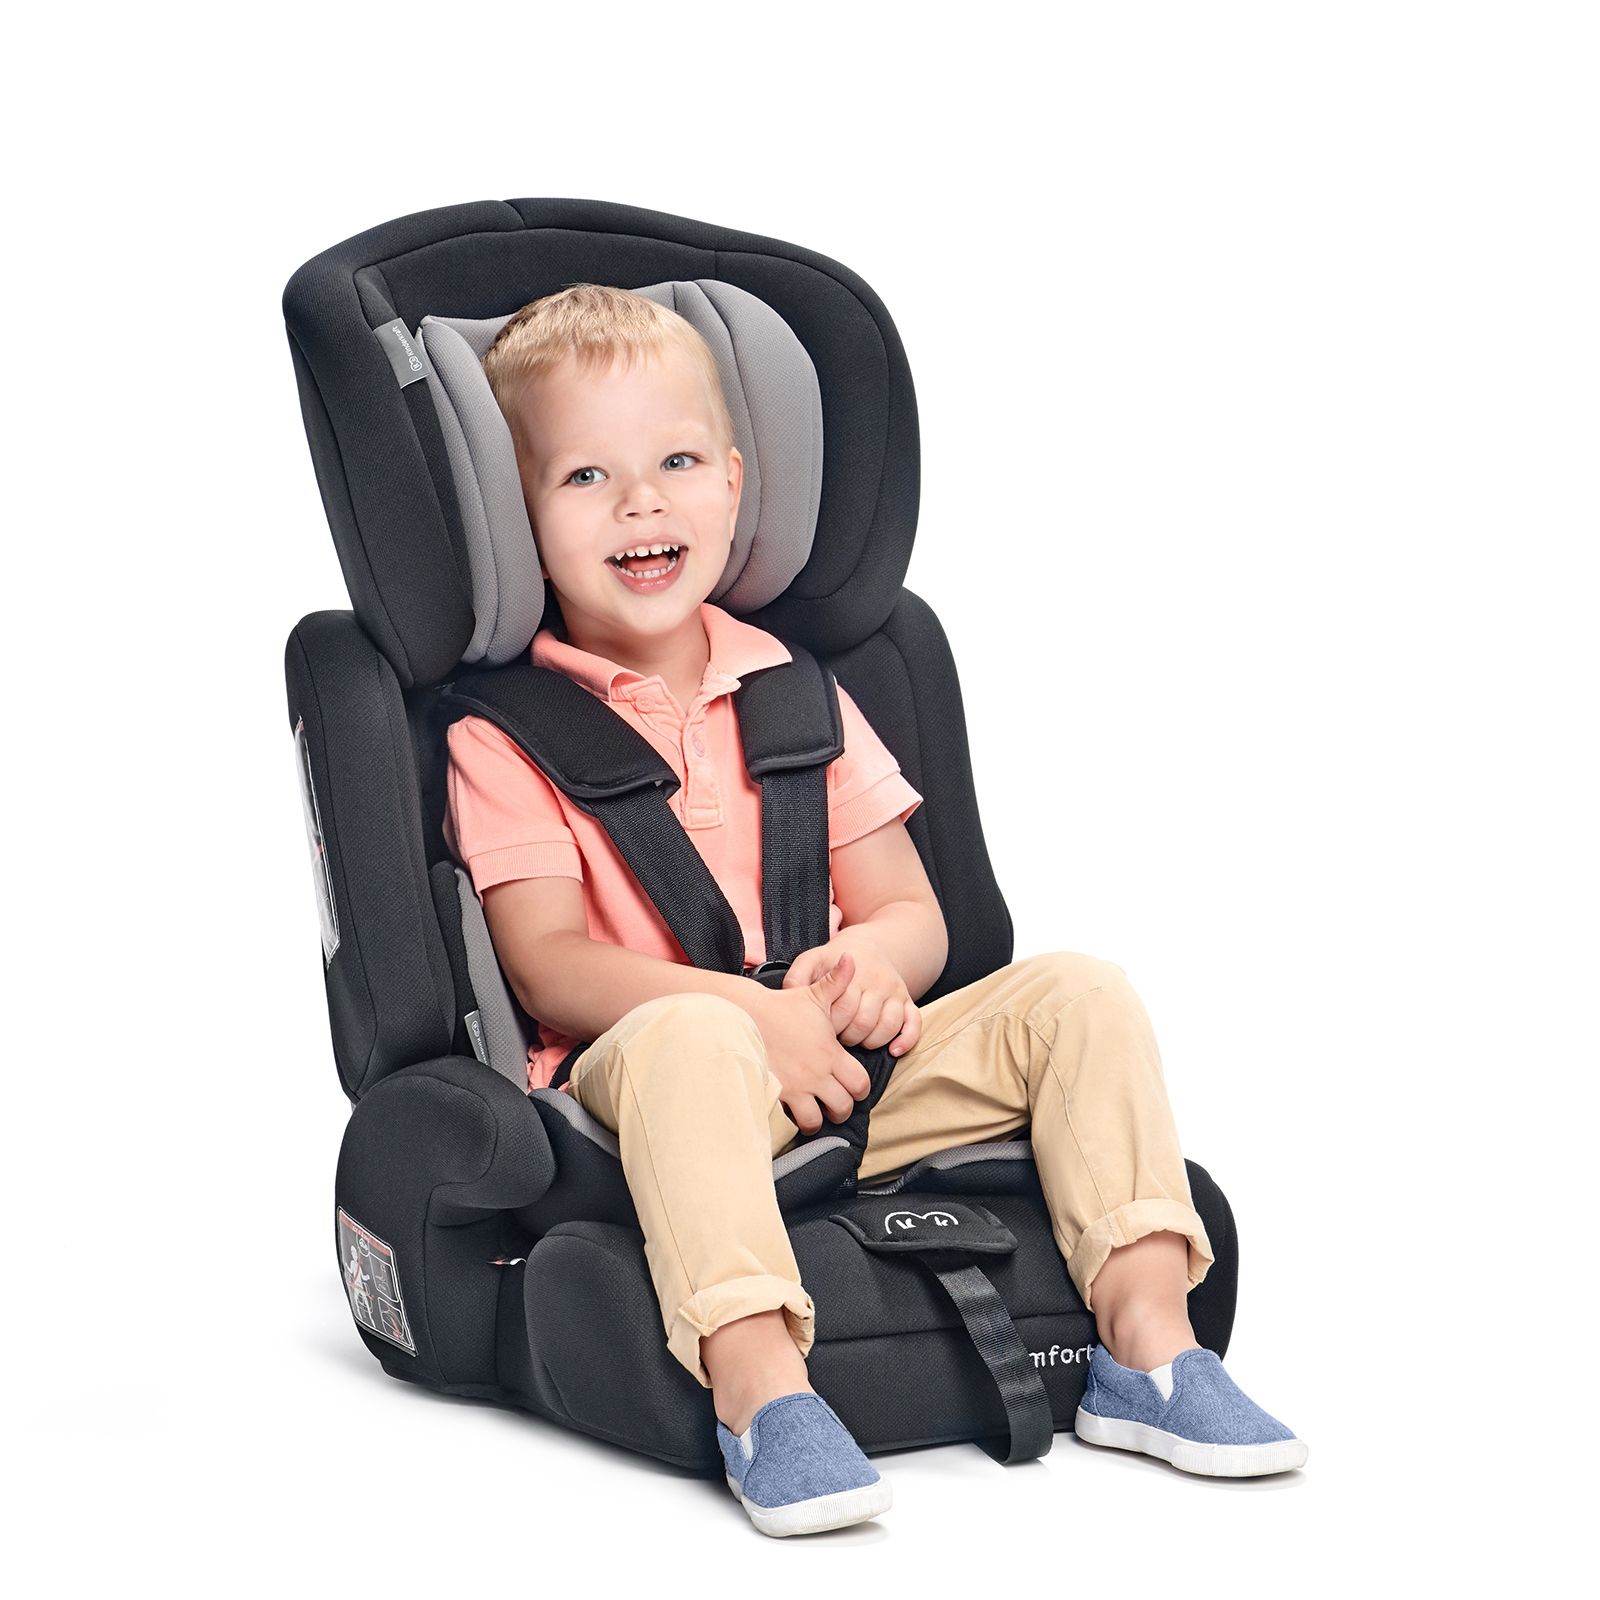 Car seat for years